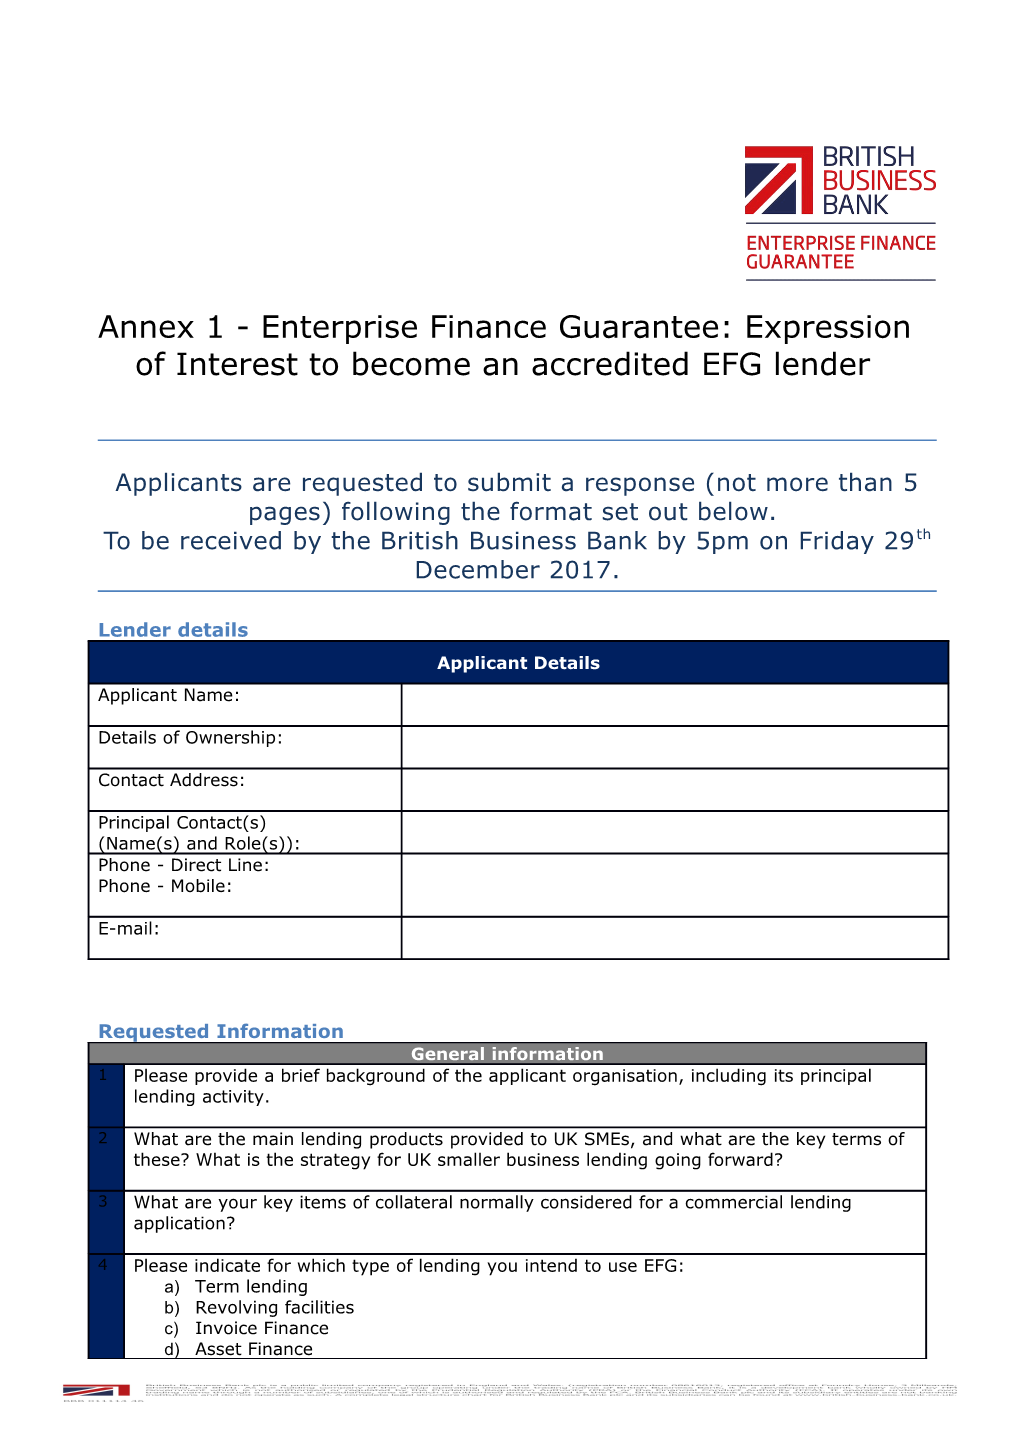 Annex 1- Enterprise Finance Guarantee: Expression of Interestto Become an Accredited EFG Lender